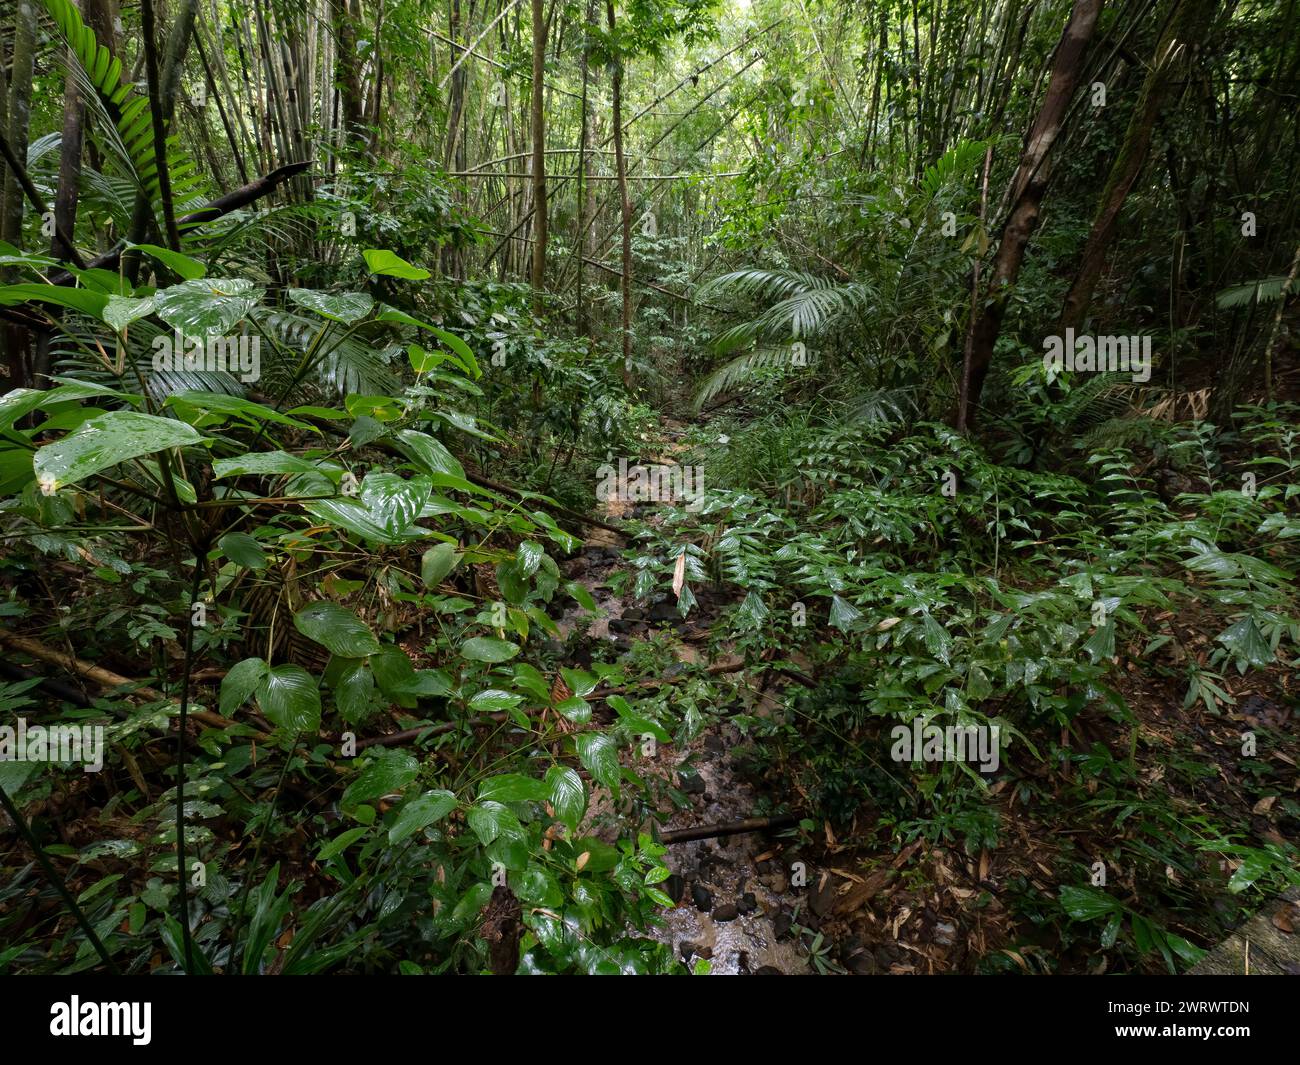 View of Tropical Rainforest, Khao Sok Nature Reserve, Thailand Stock Photo